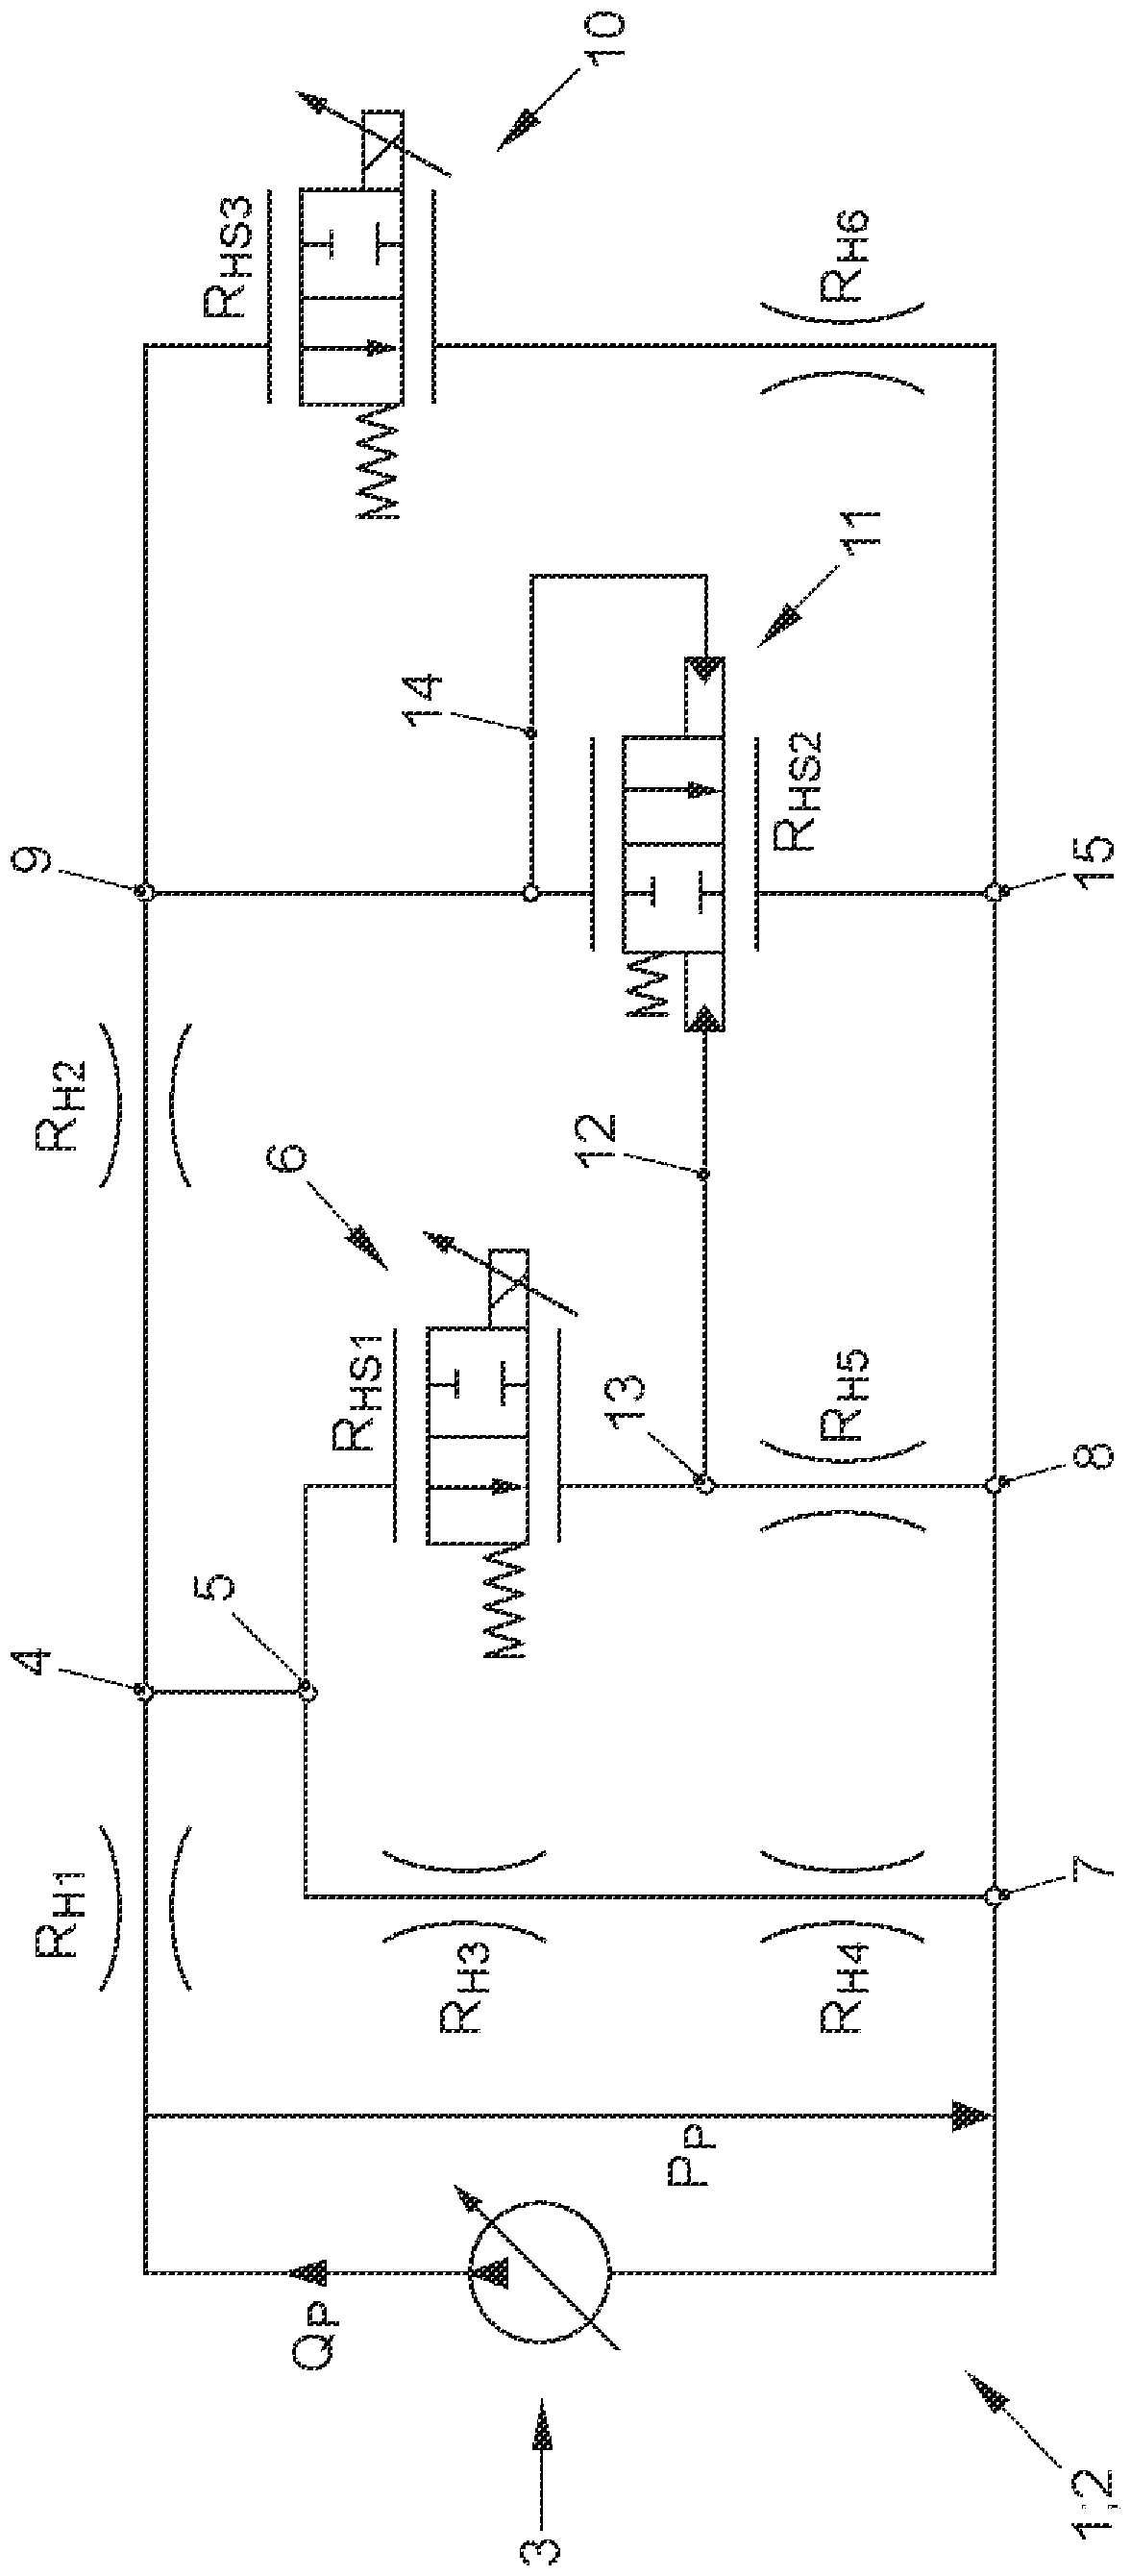 Method for controlling and/or regulating a hydraulic system of a transmission